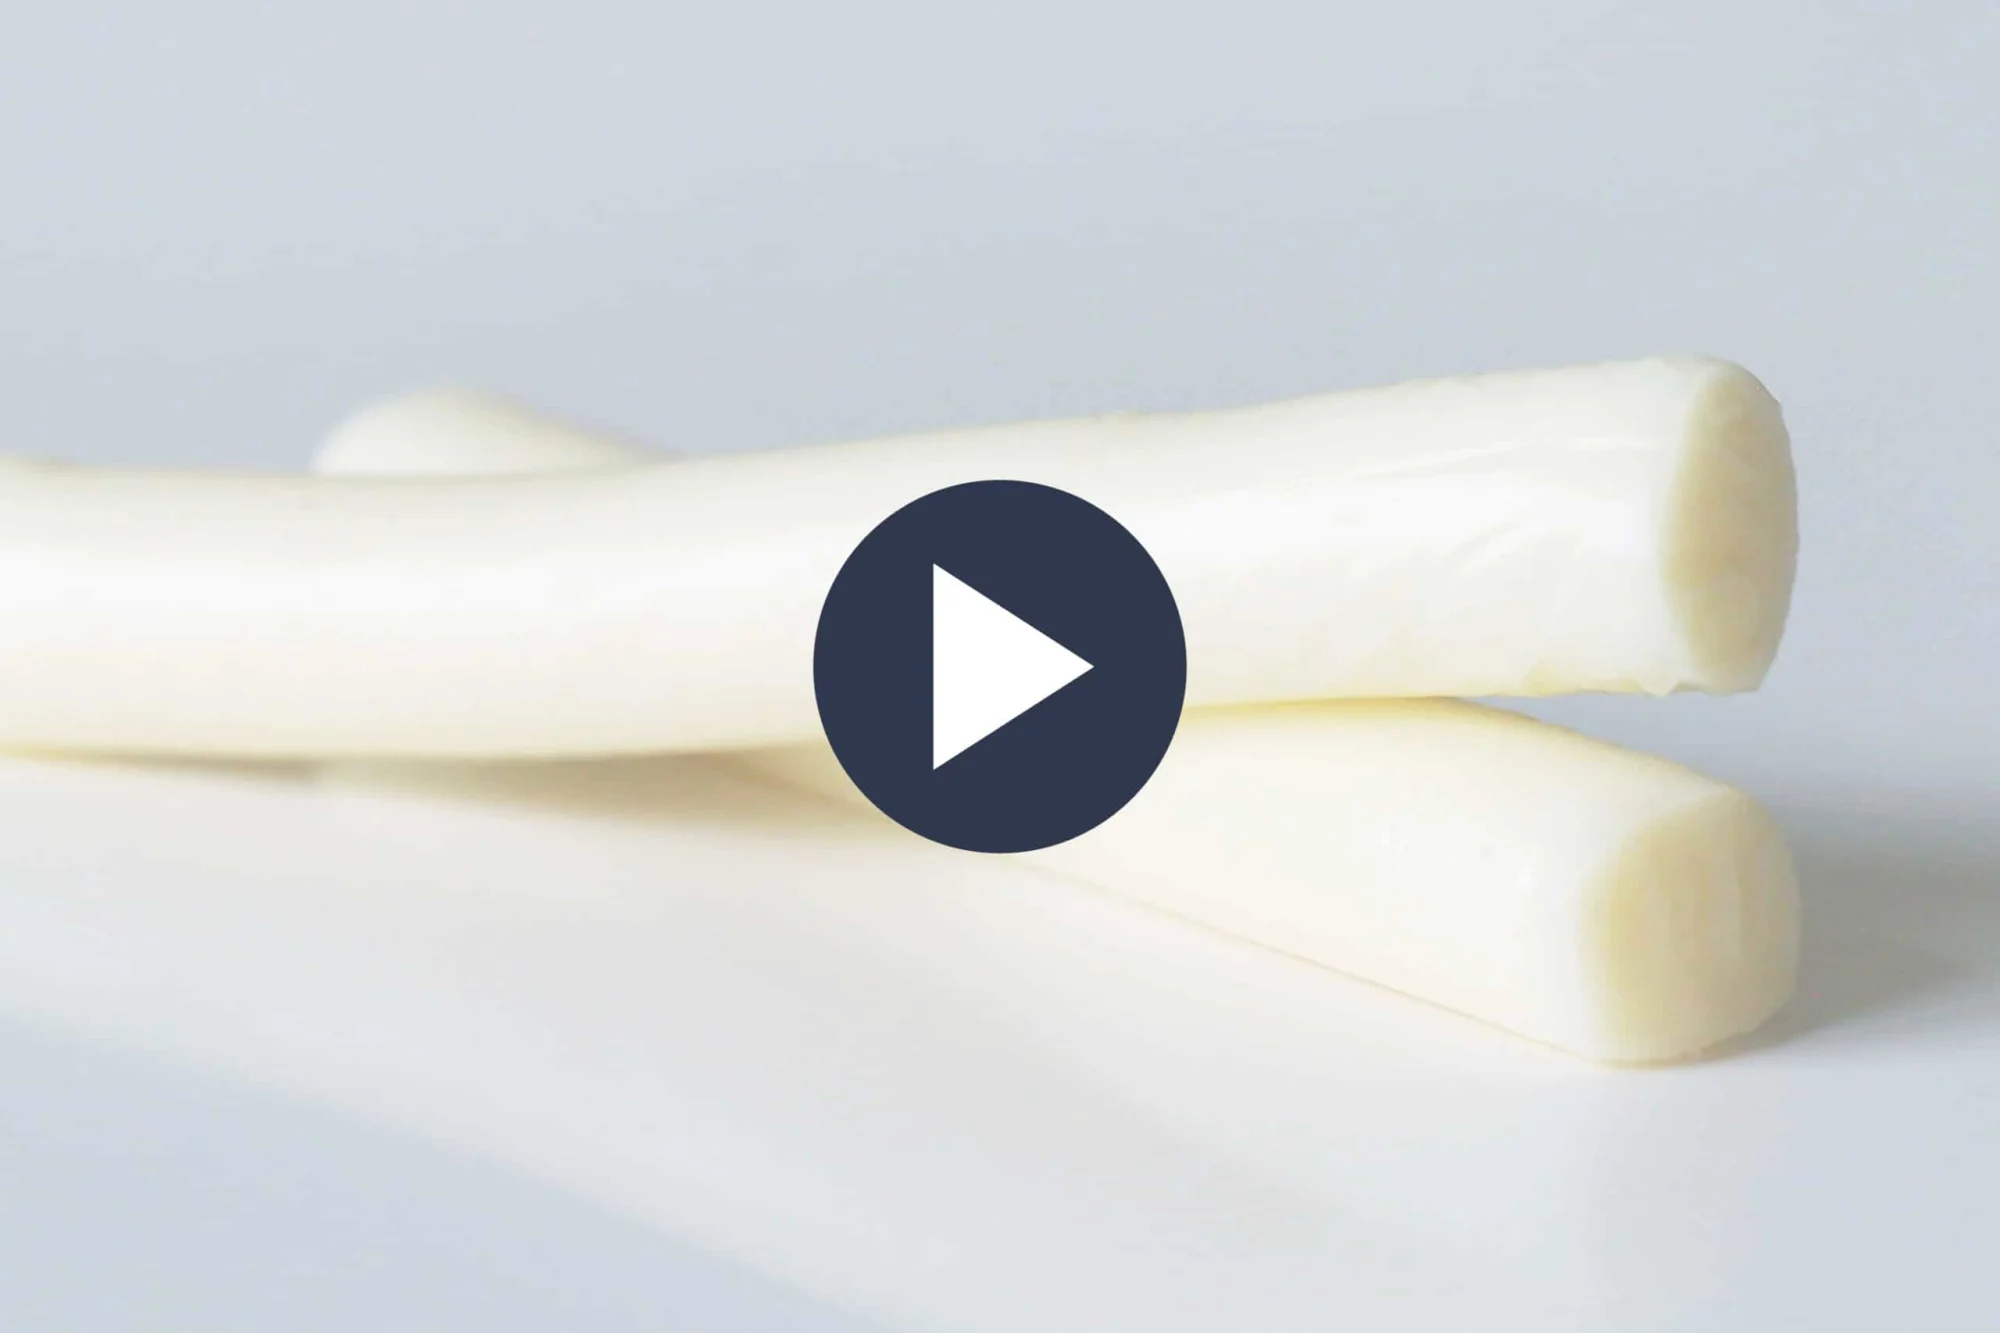 two white string cheese one on top of the other over a white table and background